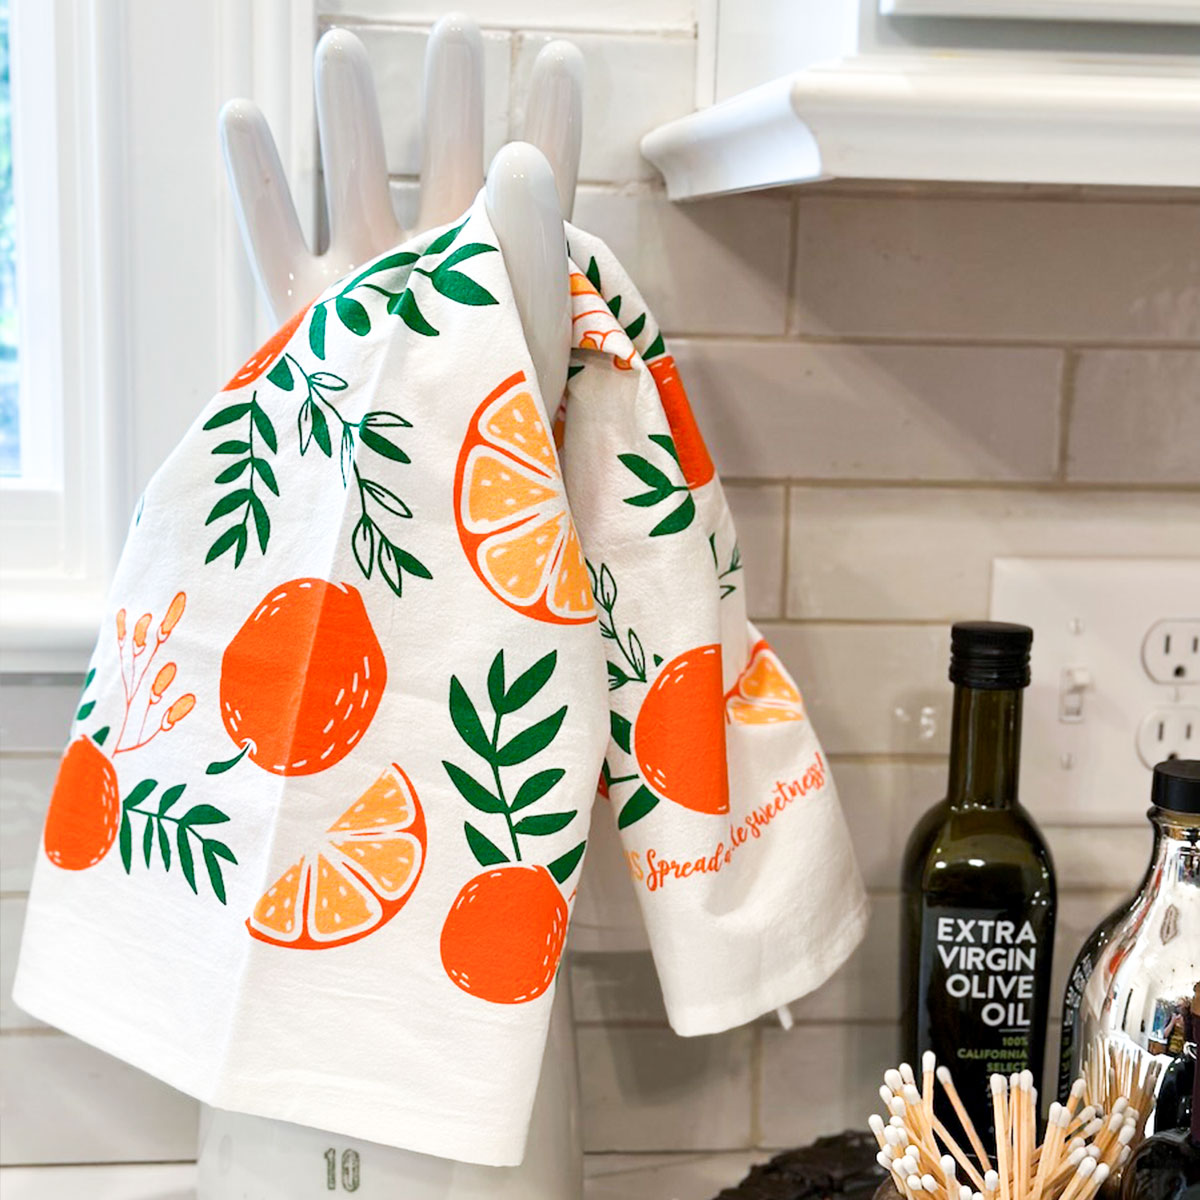 Wrap Your Gifts In Style With Beautiful Dish Towels!